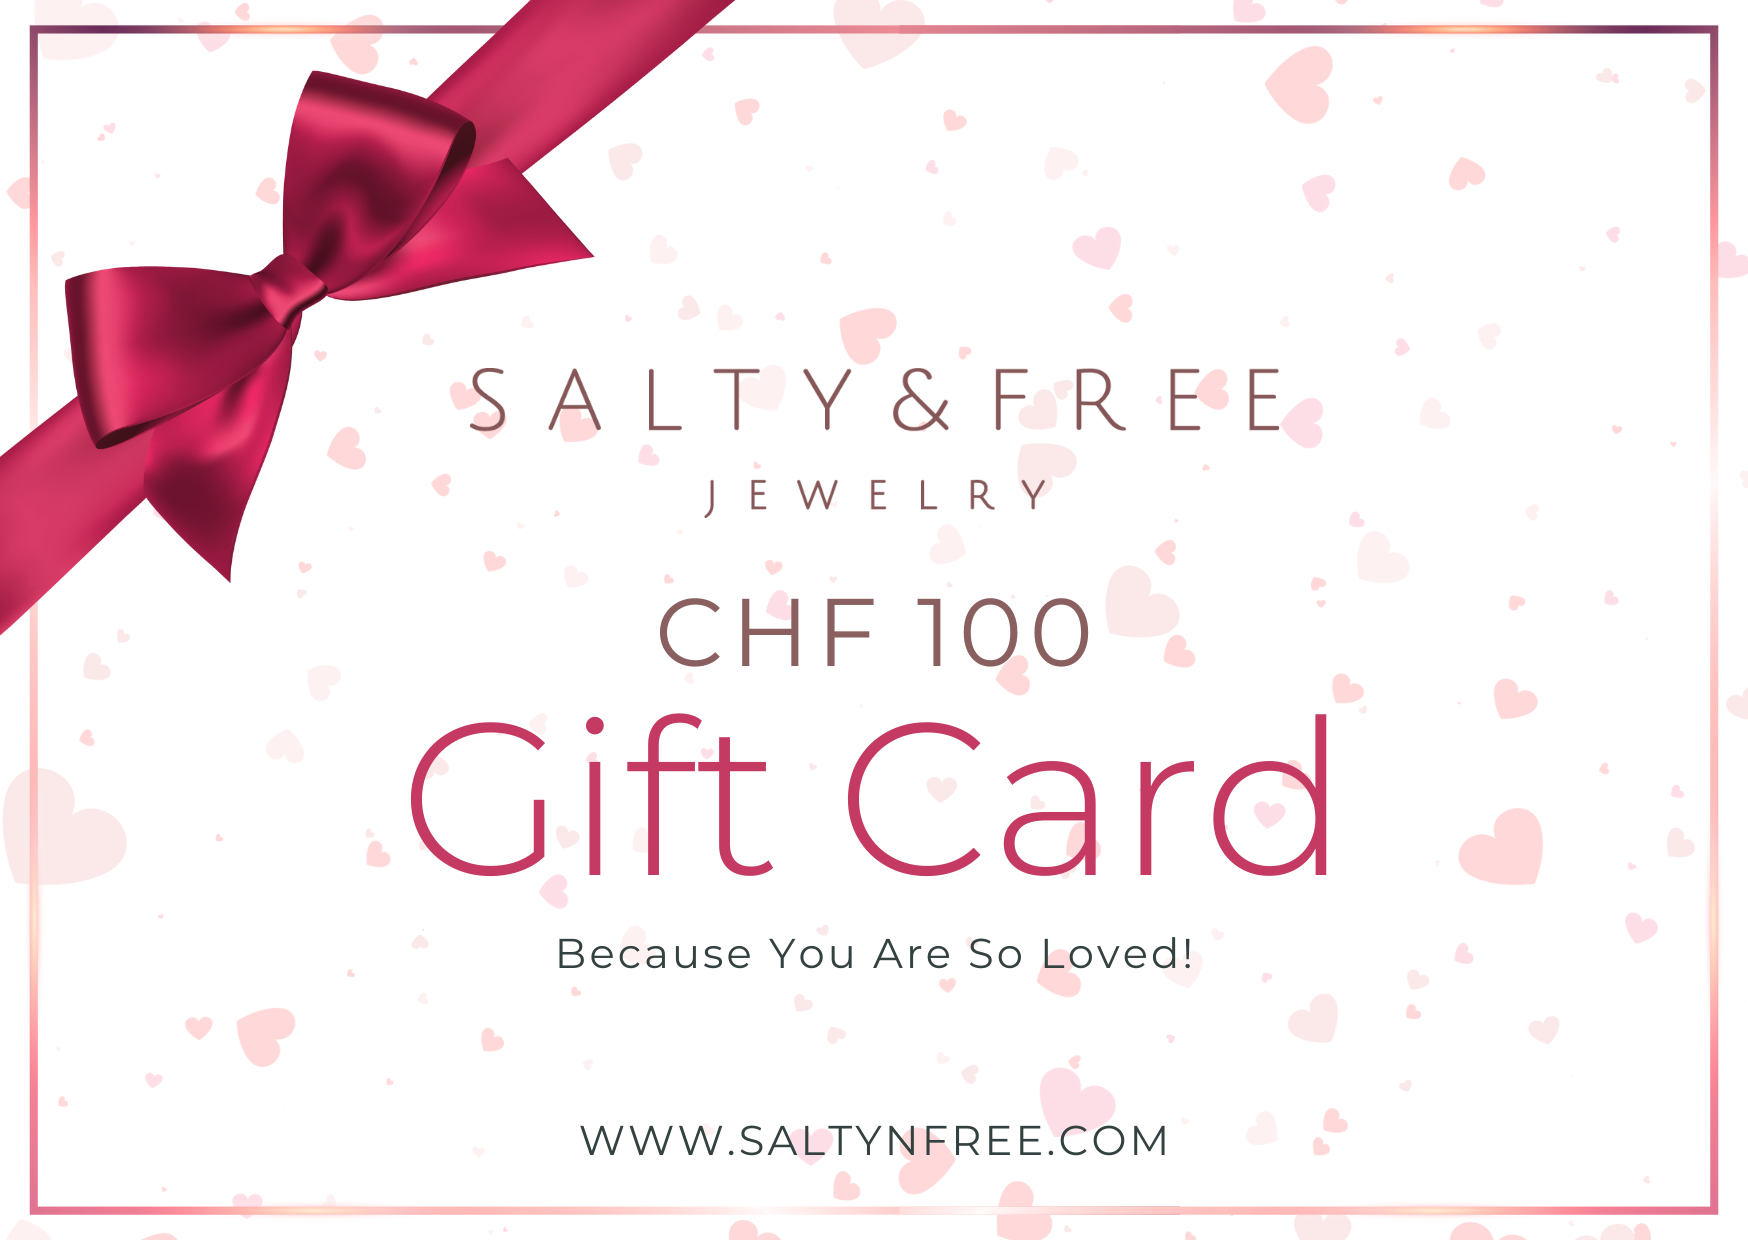 Salty & Free Gift Card CHF 100 Because You Are So Loved